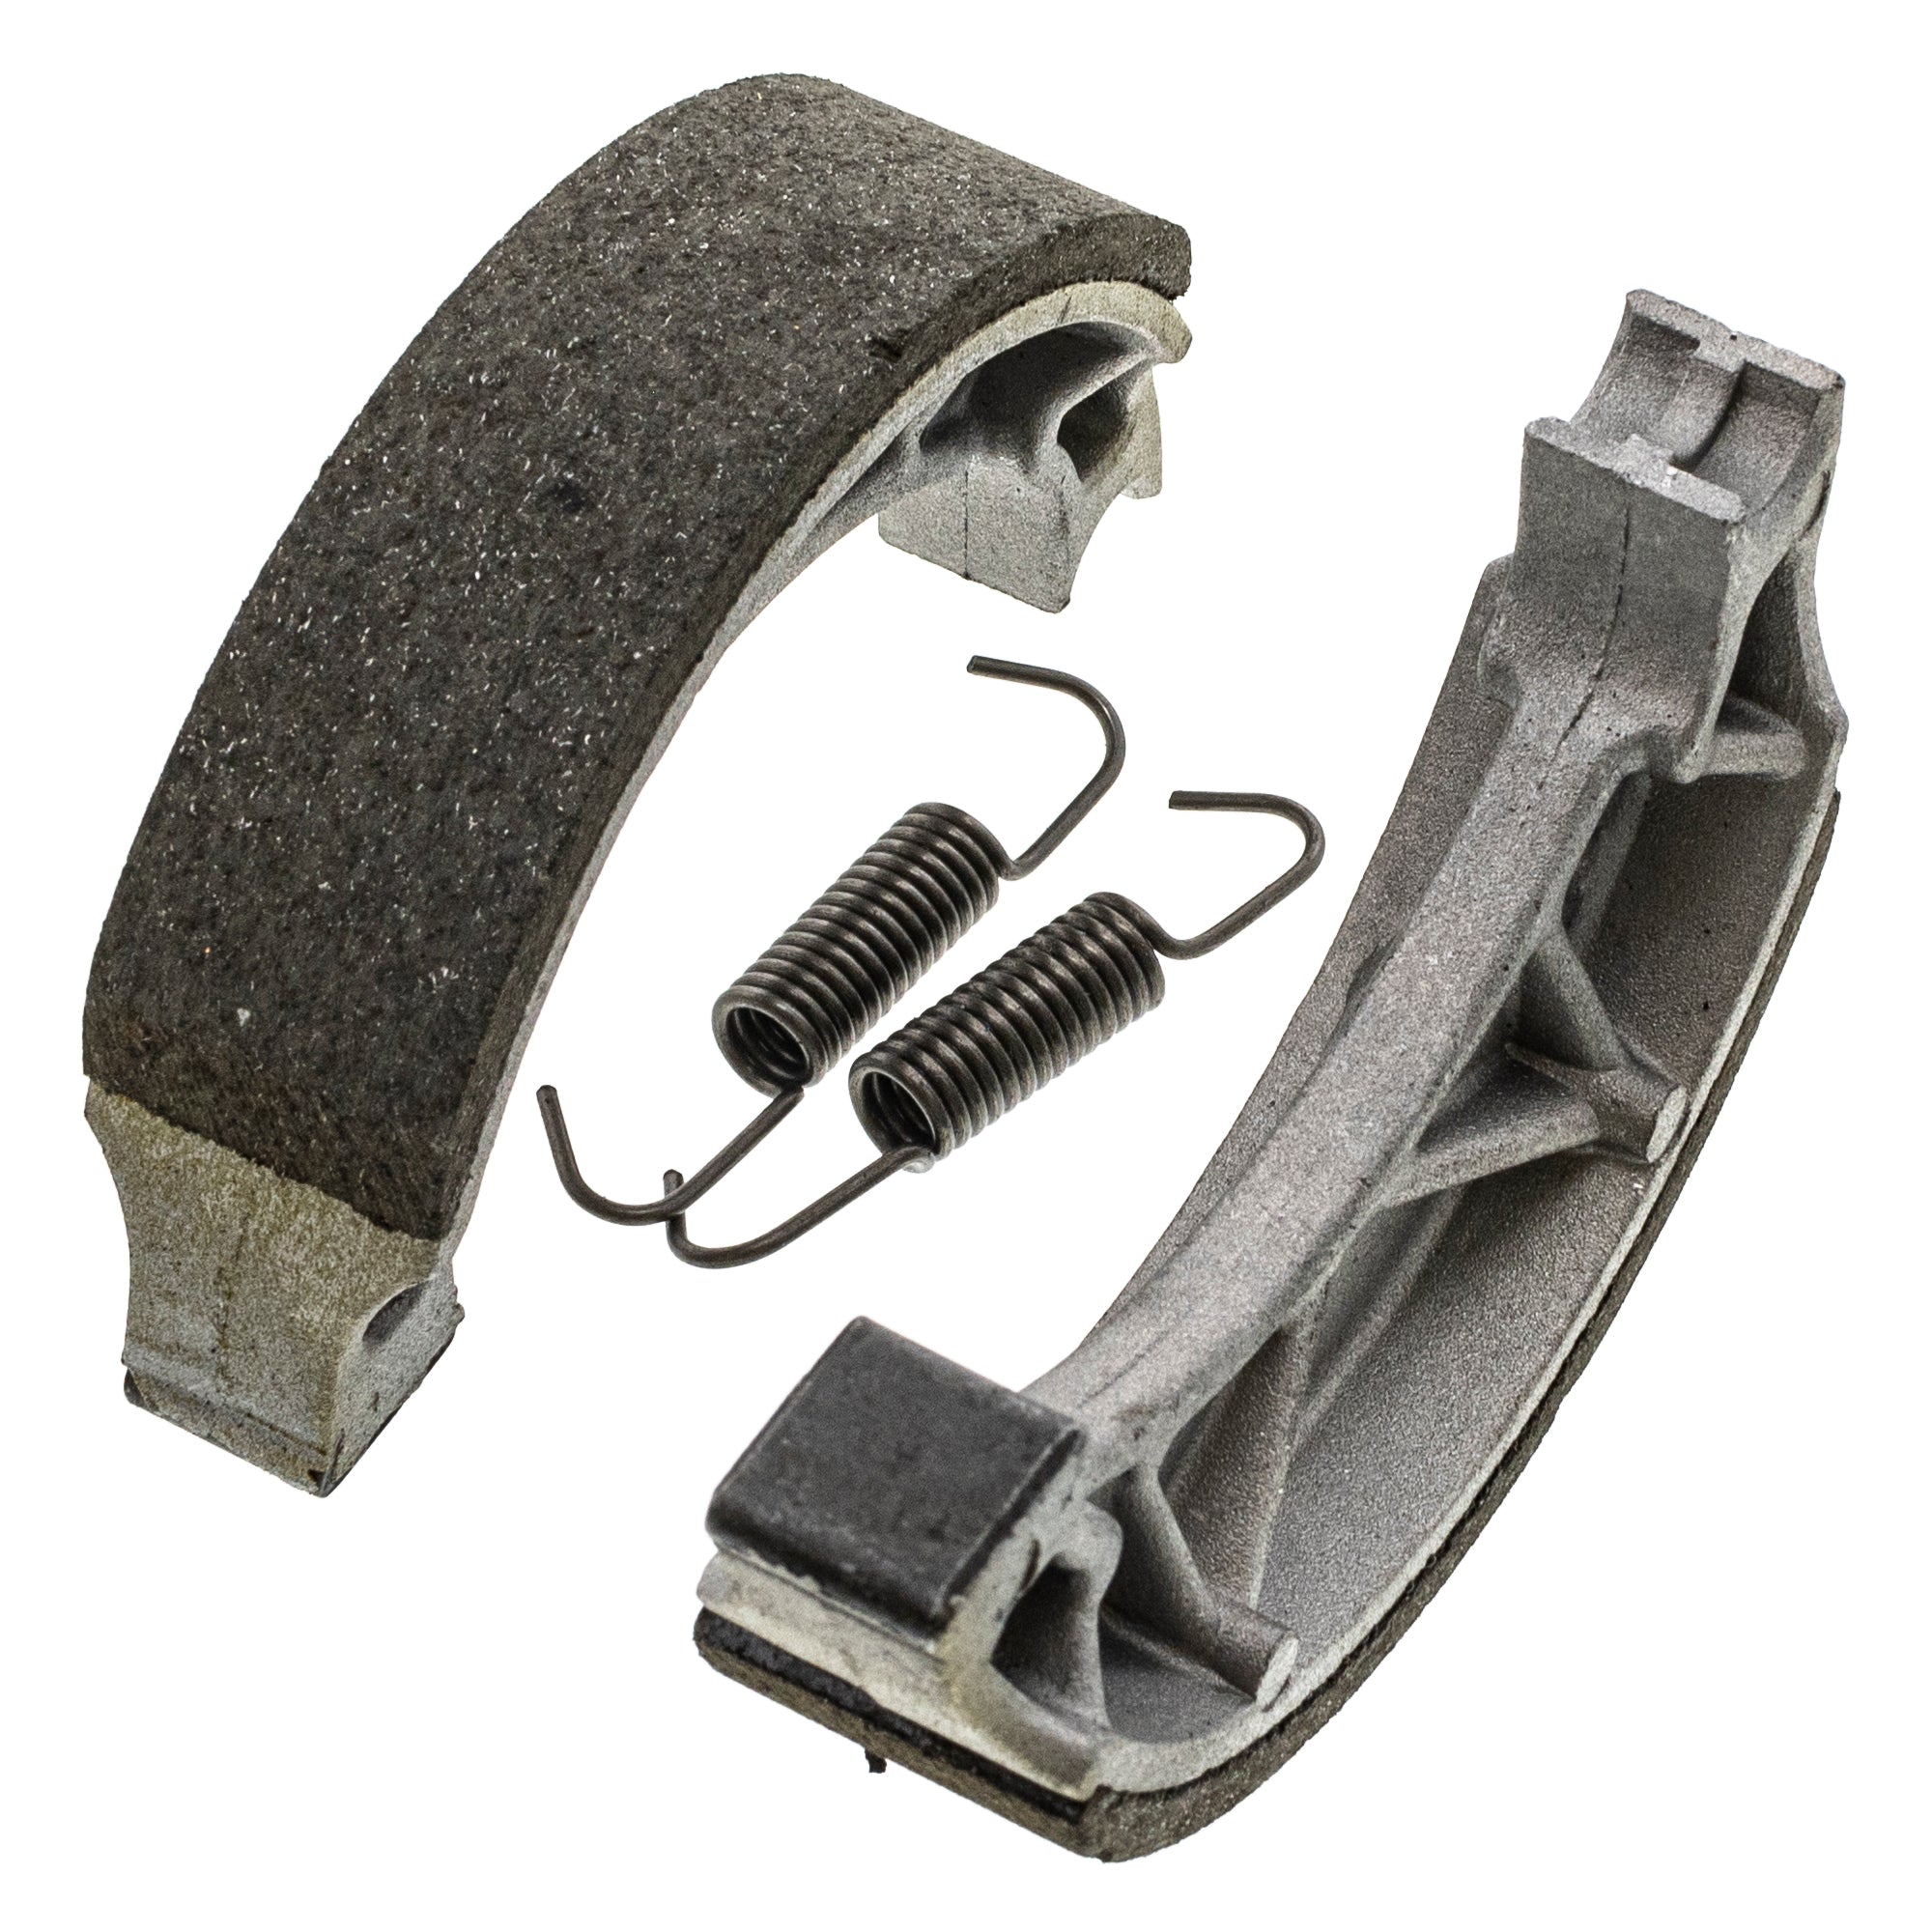 Brake Pad with Shoe Set for Yamaha TW200 XT225 Front Rear Organic